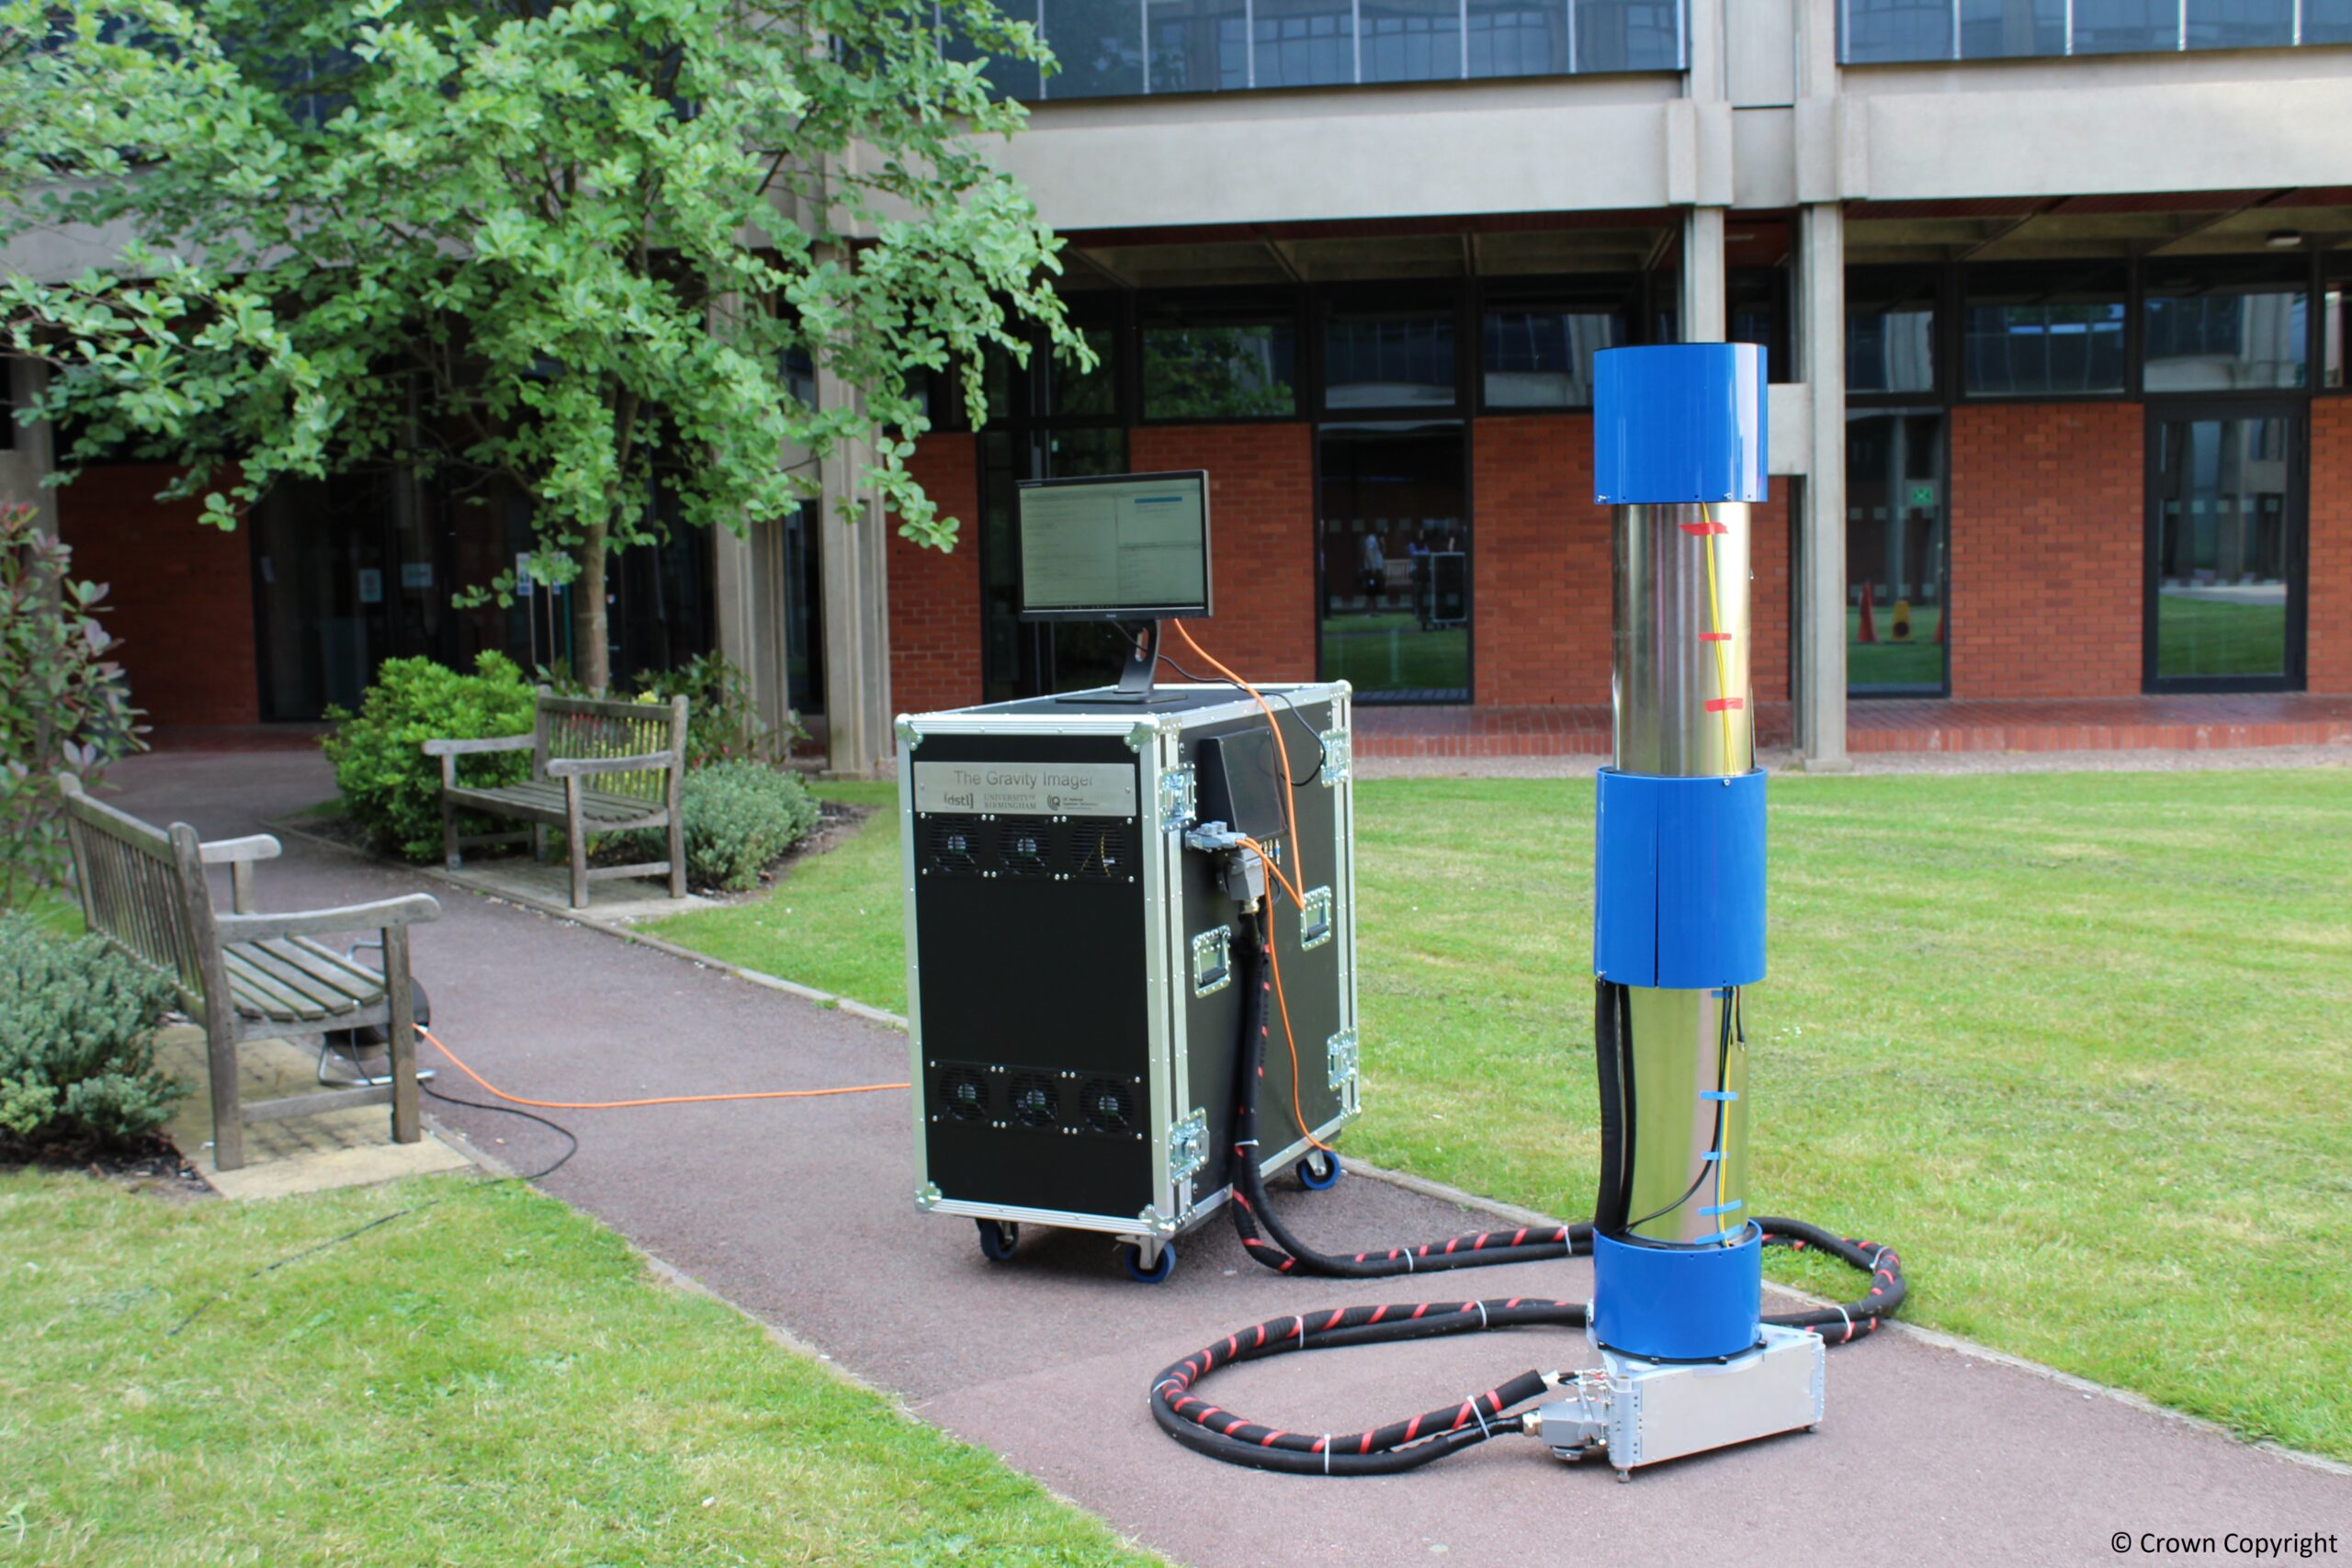 a 2-meter-tall silver cylinder capped with a blue top and bottom is tethered by cables to a cart of equipment out on a sidewalk with a building and trees in the background